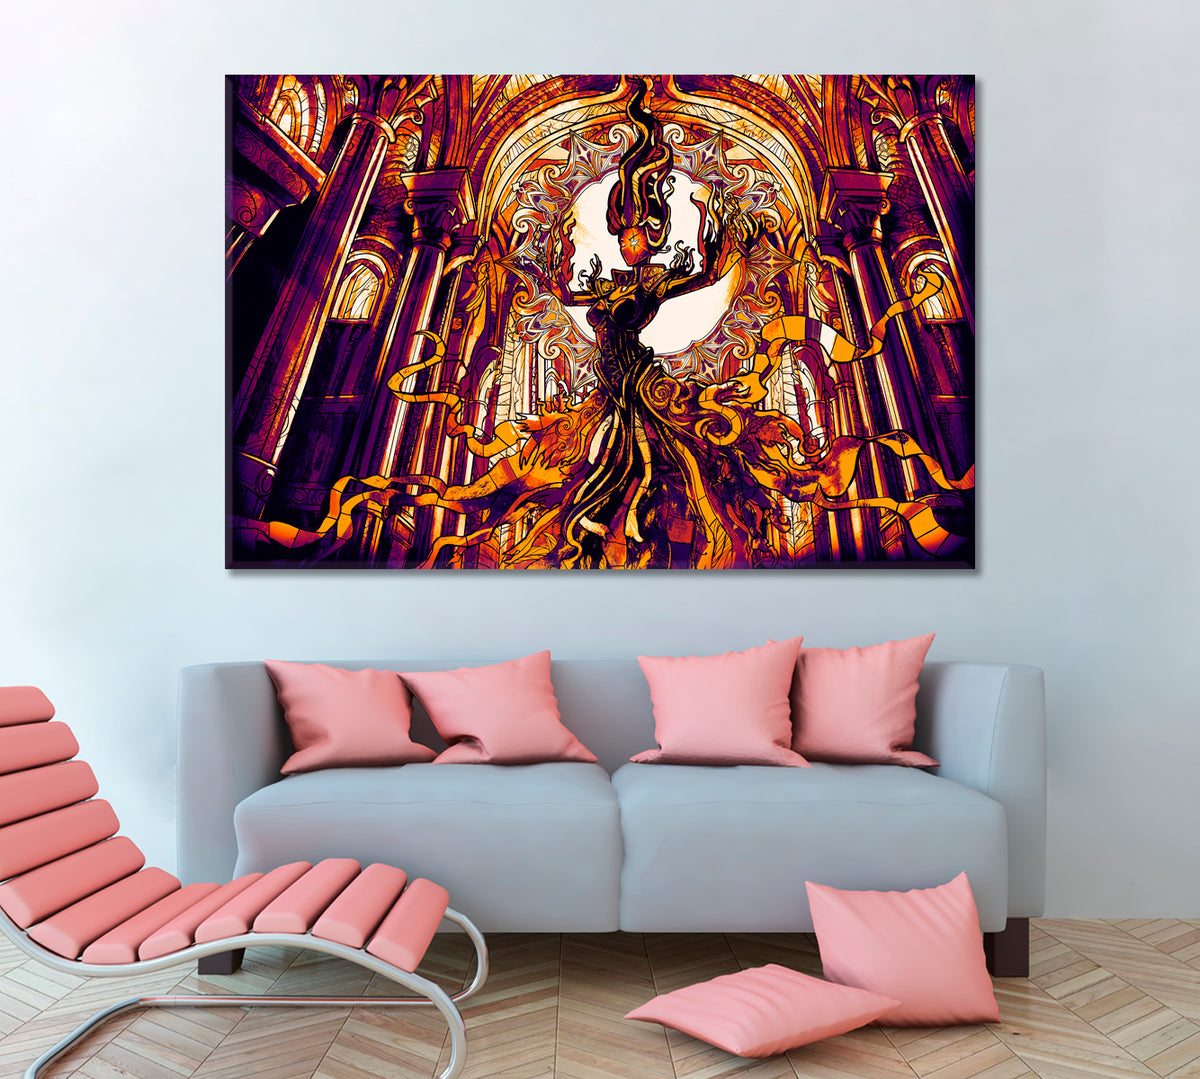 FANTASY Girl Hovers Majestic Cathedral Surreal Fantasy Large Art Print Décor Artesty 1 panel 24" x 16" 